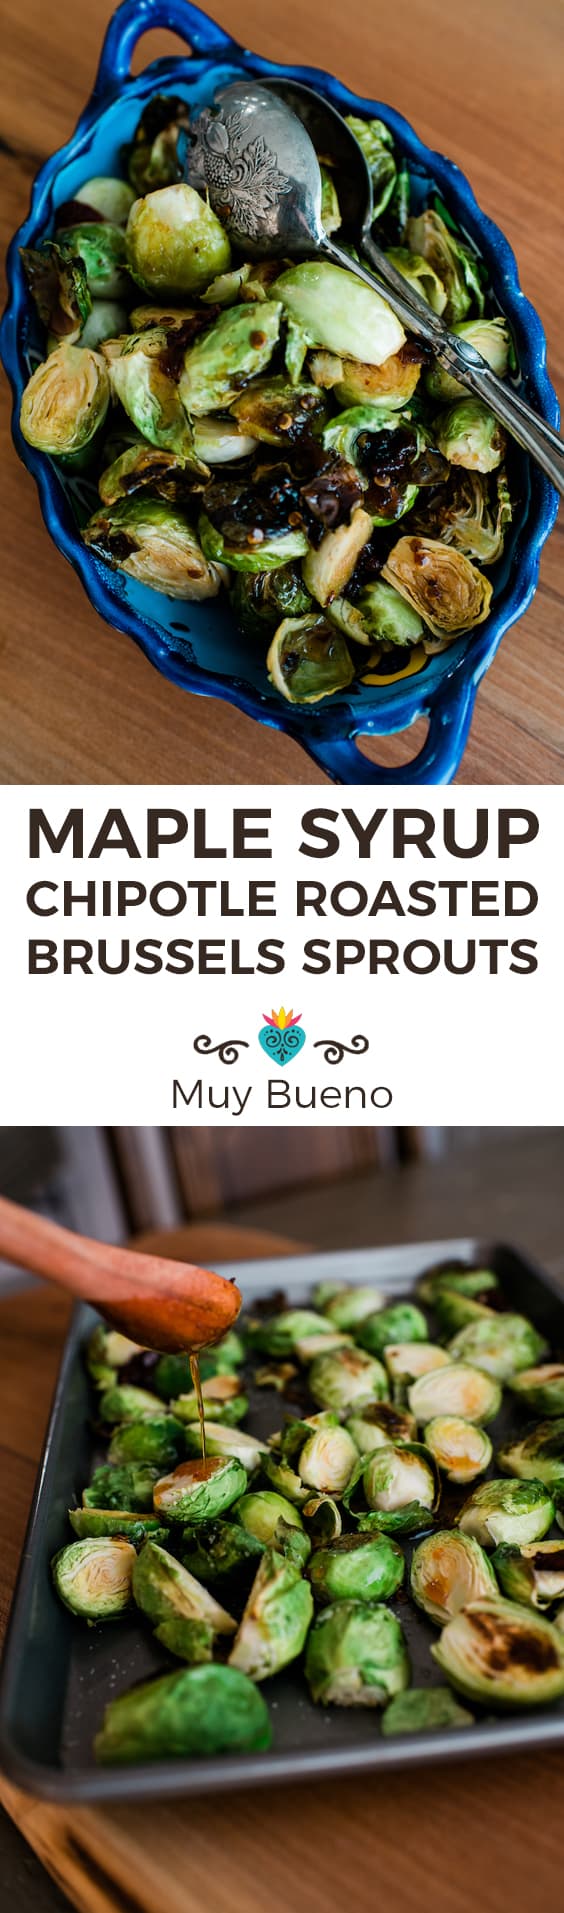 Maple Syrup Chipotle Roasted Brussels Sprouts collage with text overlay